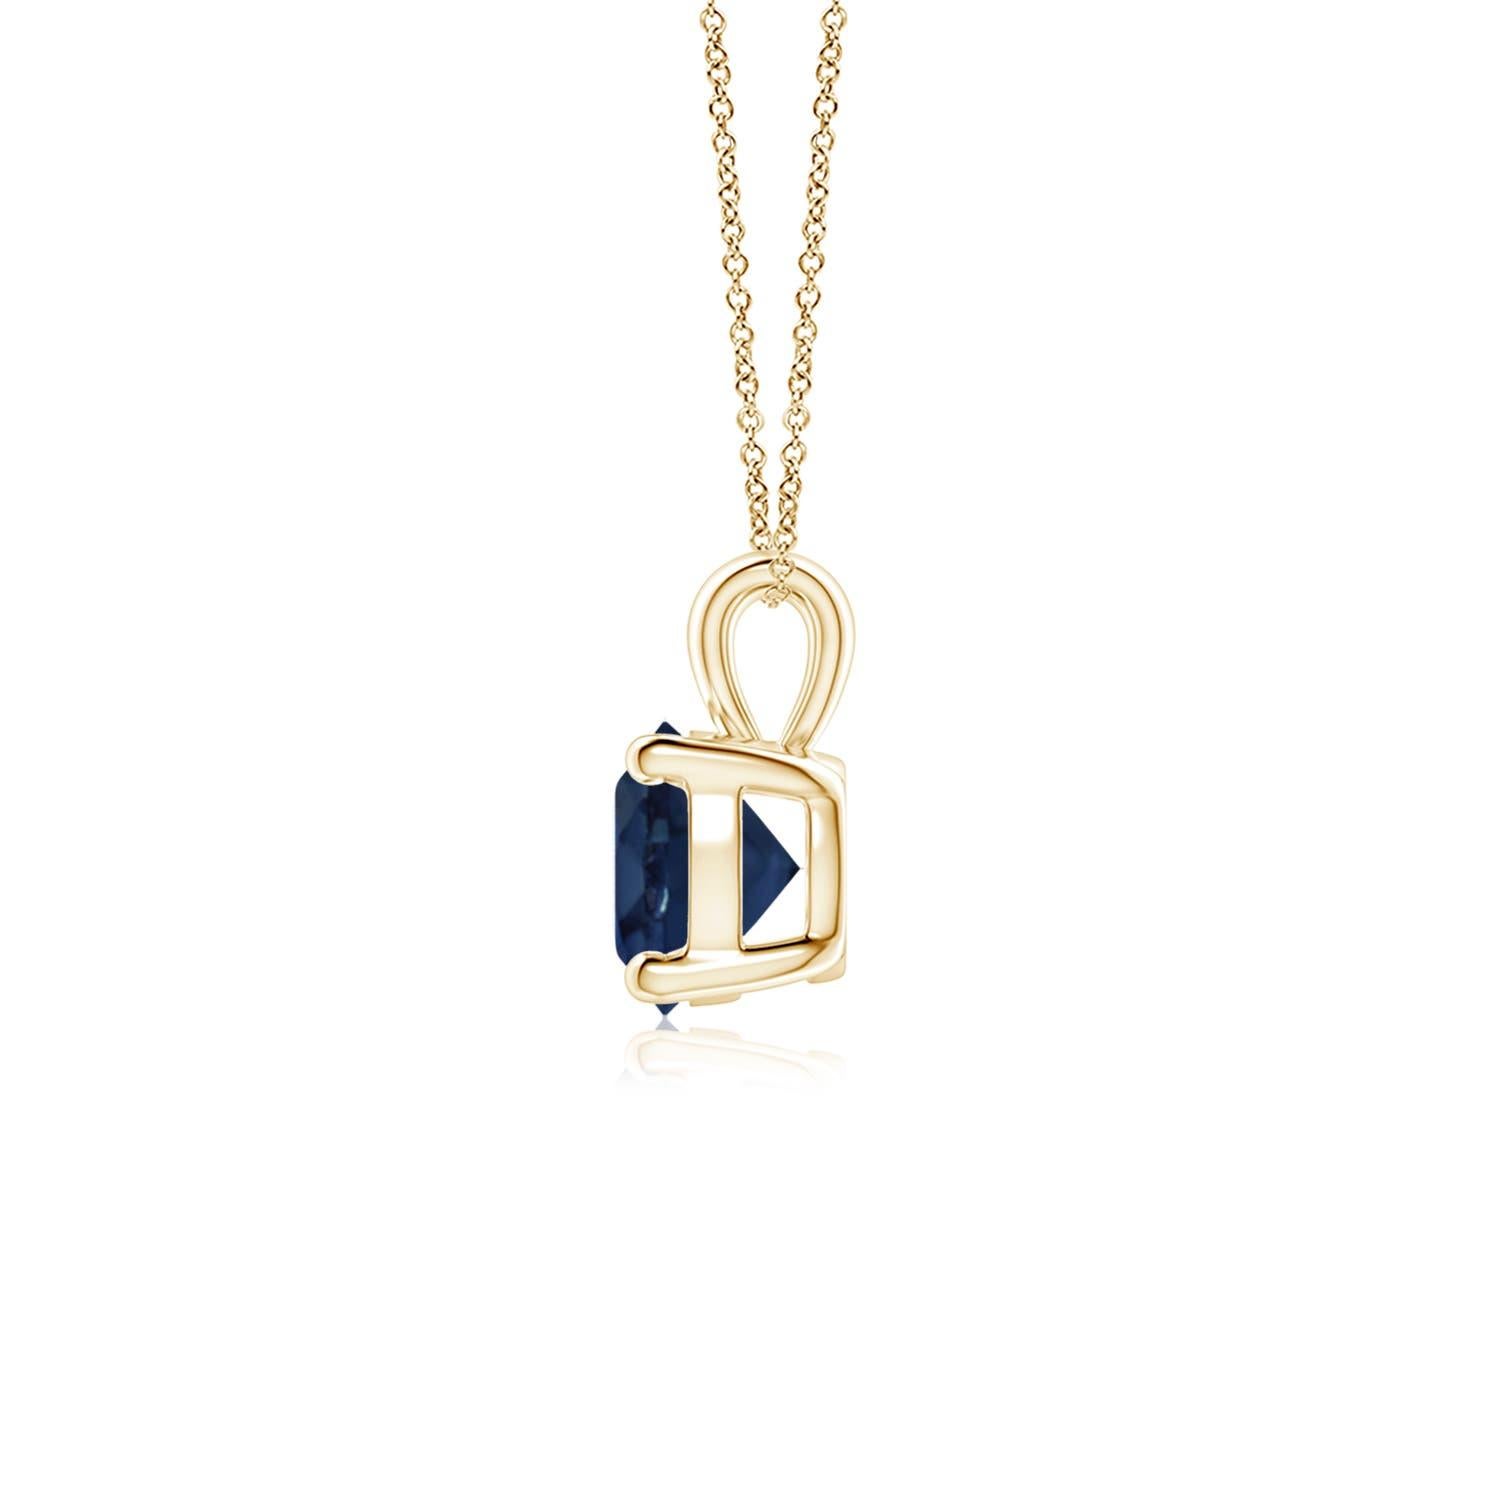 Linked to a lustrous bale is a stunning sapphire solitaire secured in a four prong setting. Crafted in 14k yellow gold, the elegant design of this classic sapphire pendant draws all attention towards the magnificence of the center stone.
Blue